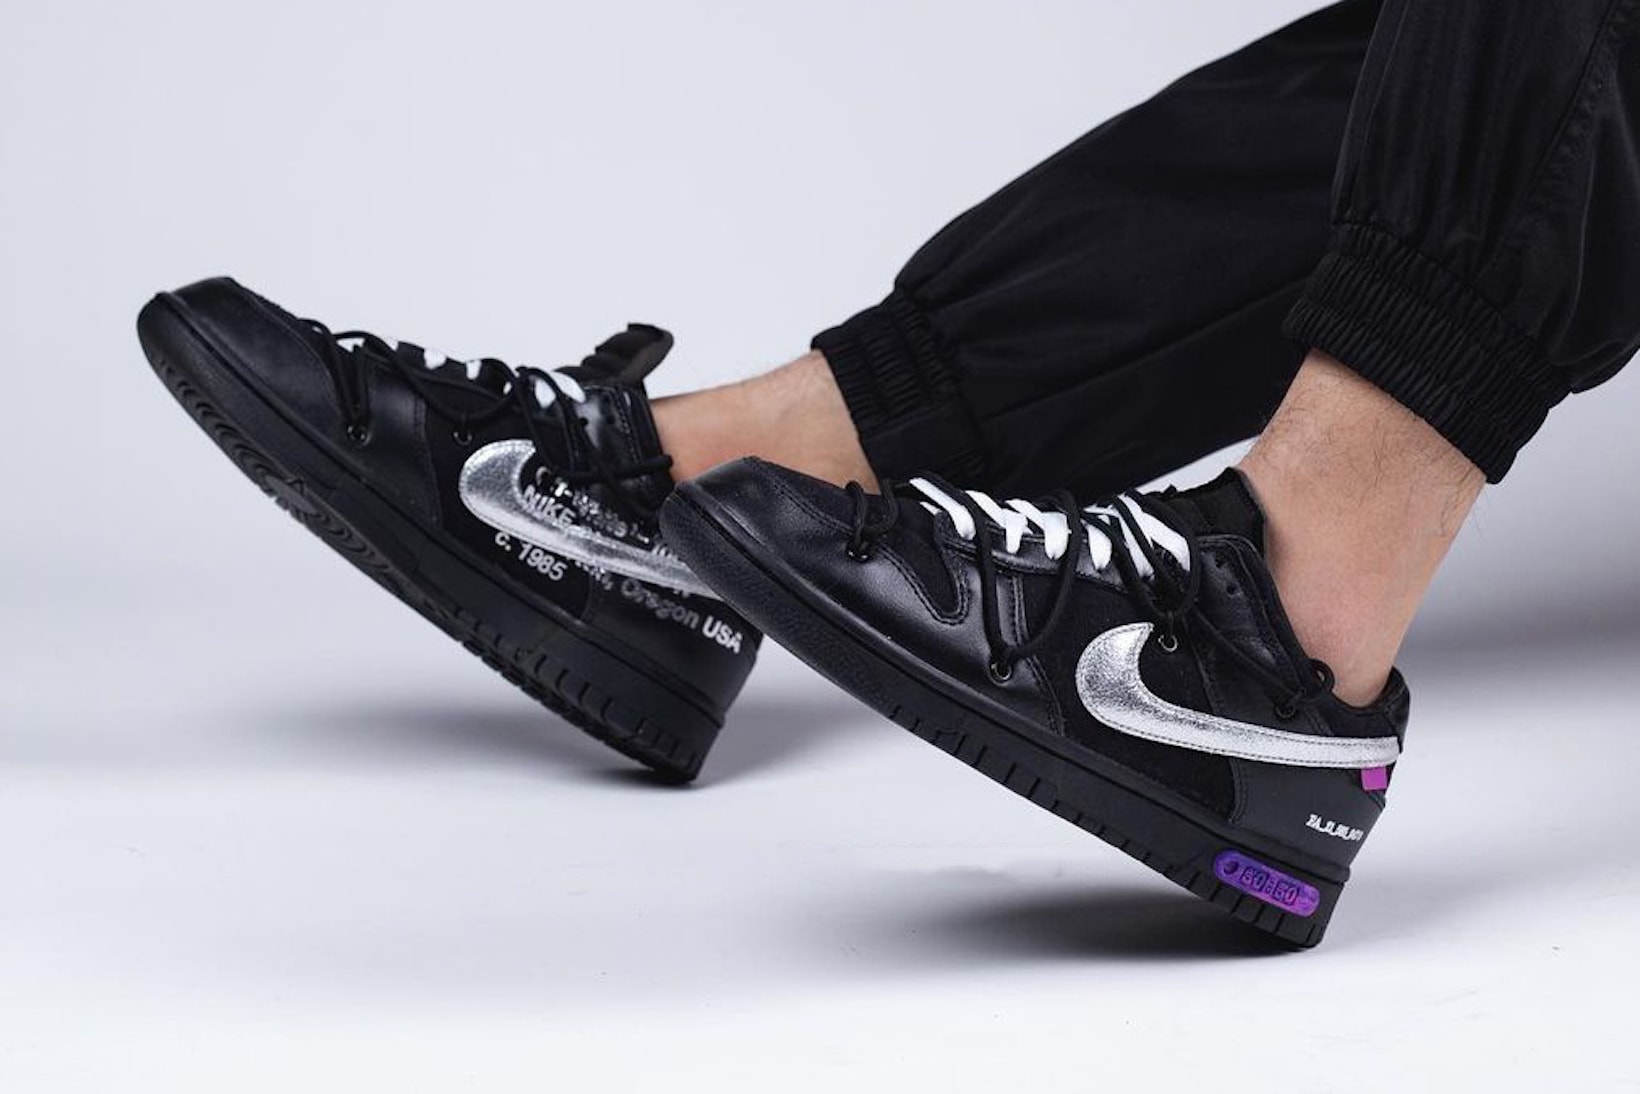 off white nike virgil abloh the 50 dunk low sneakers collaboration black silver colorway lateral